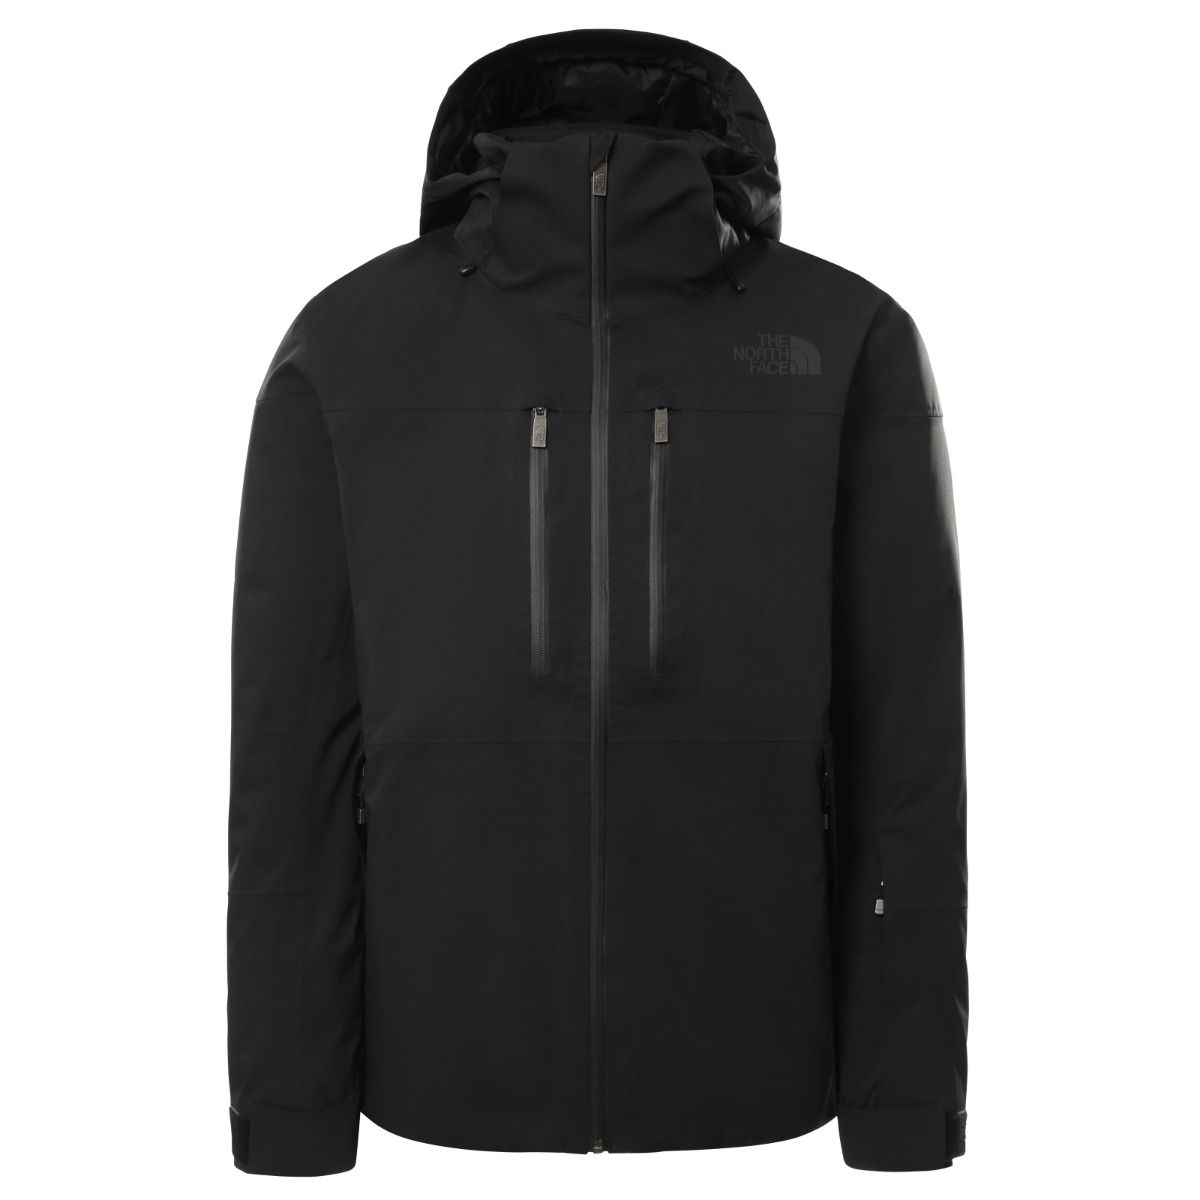 The North Face - M's CHAKAL JACKET